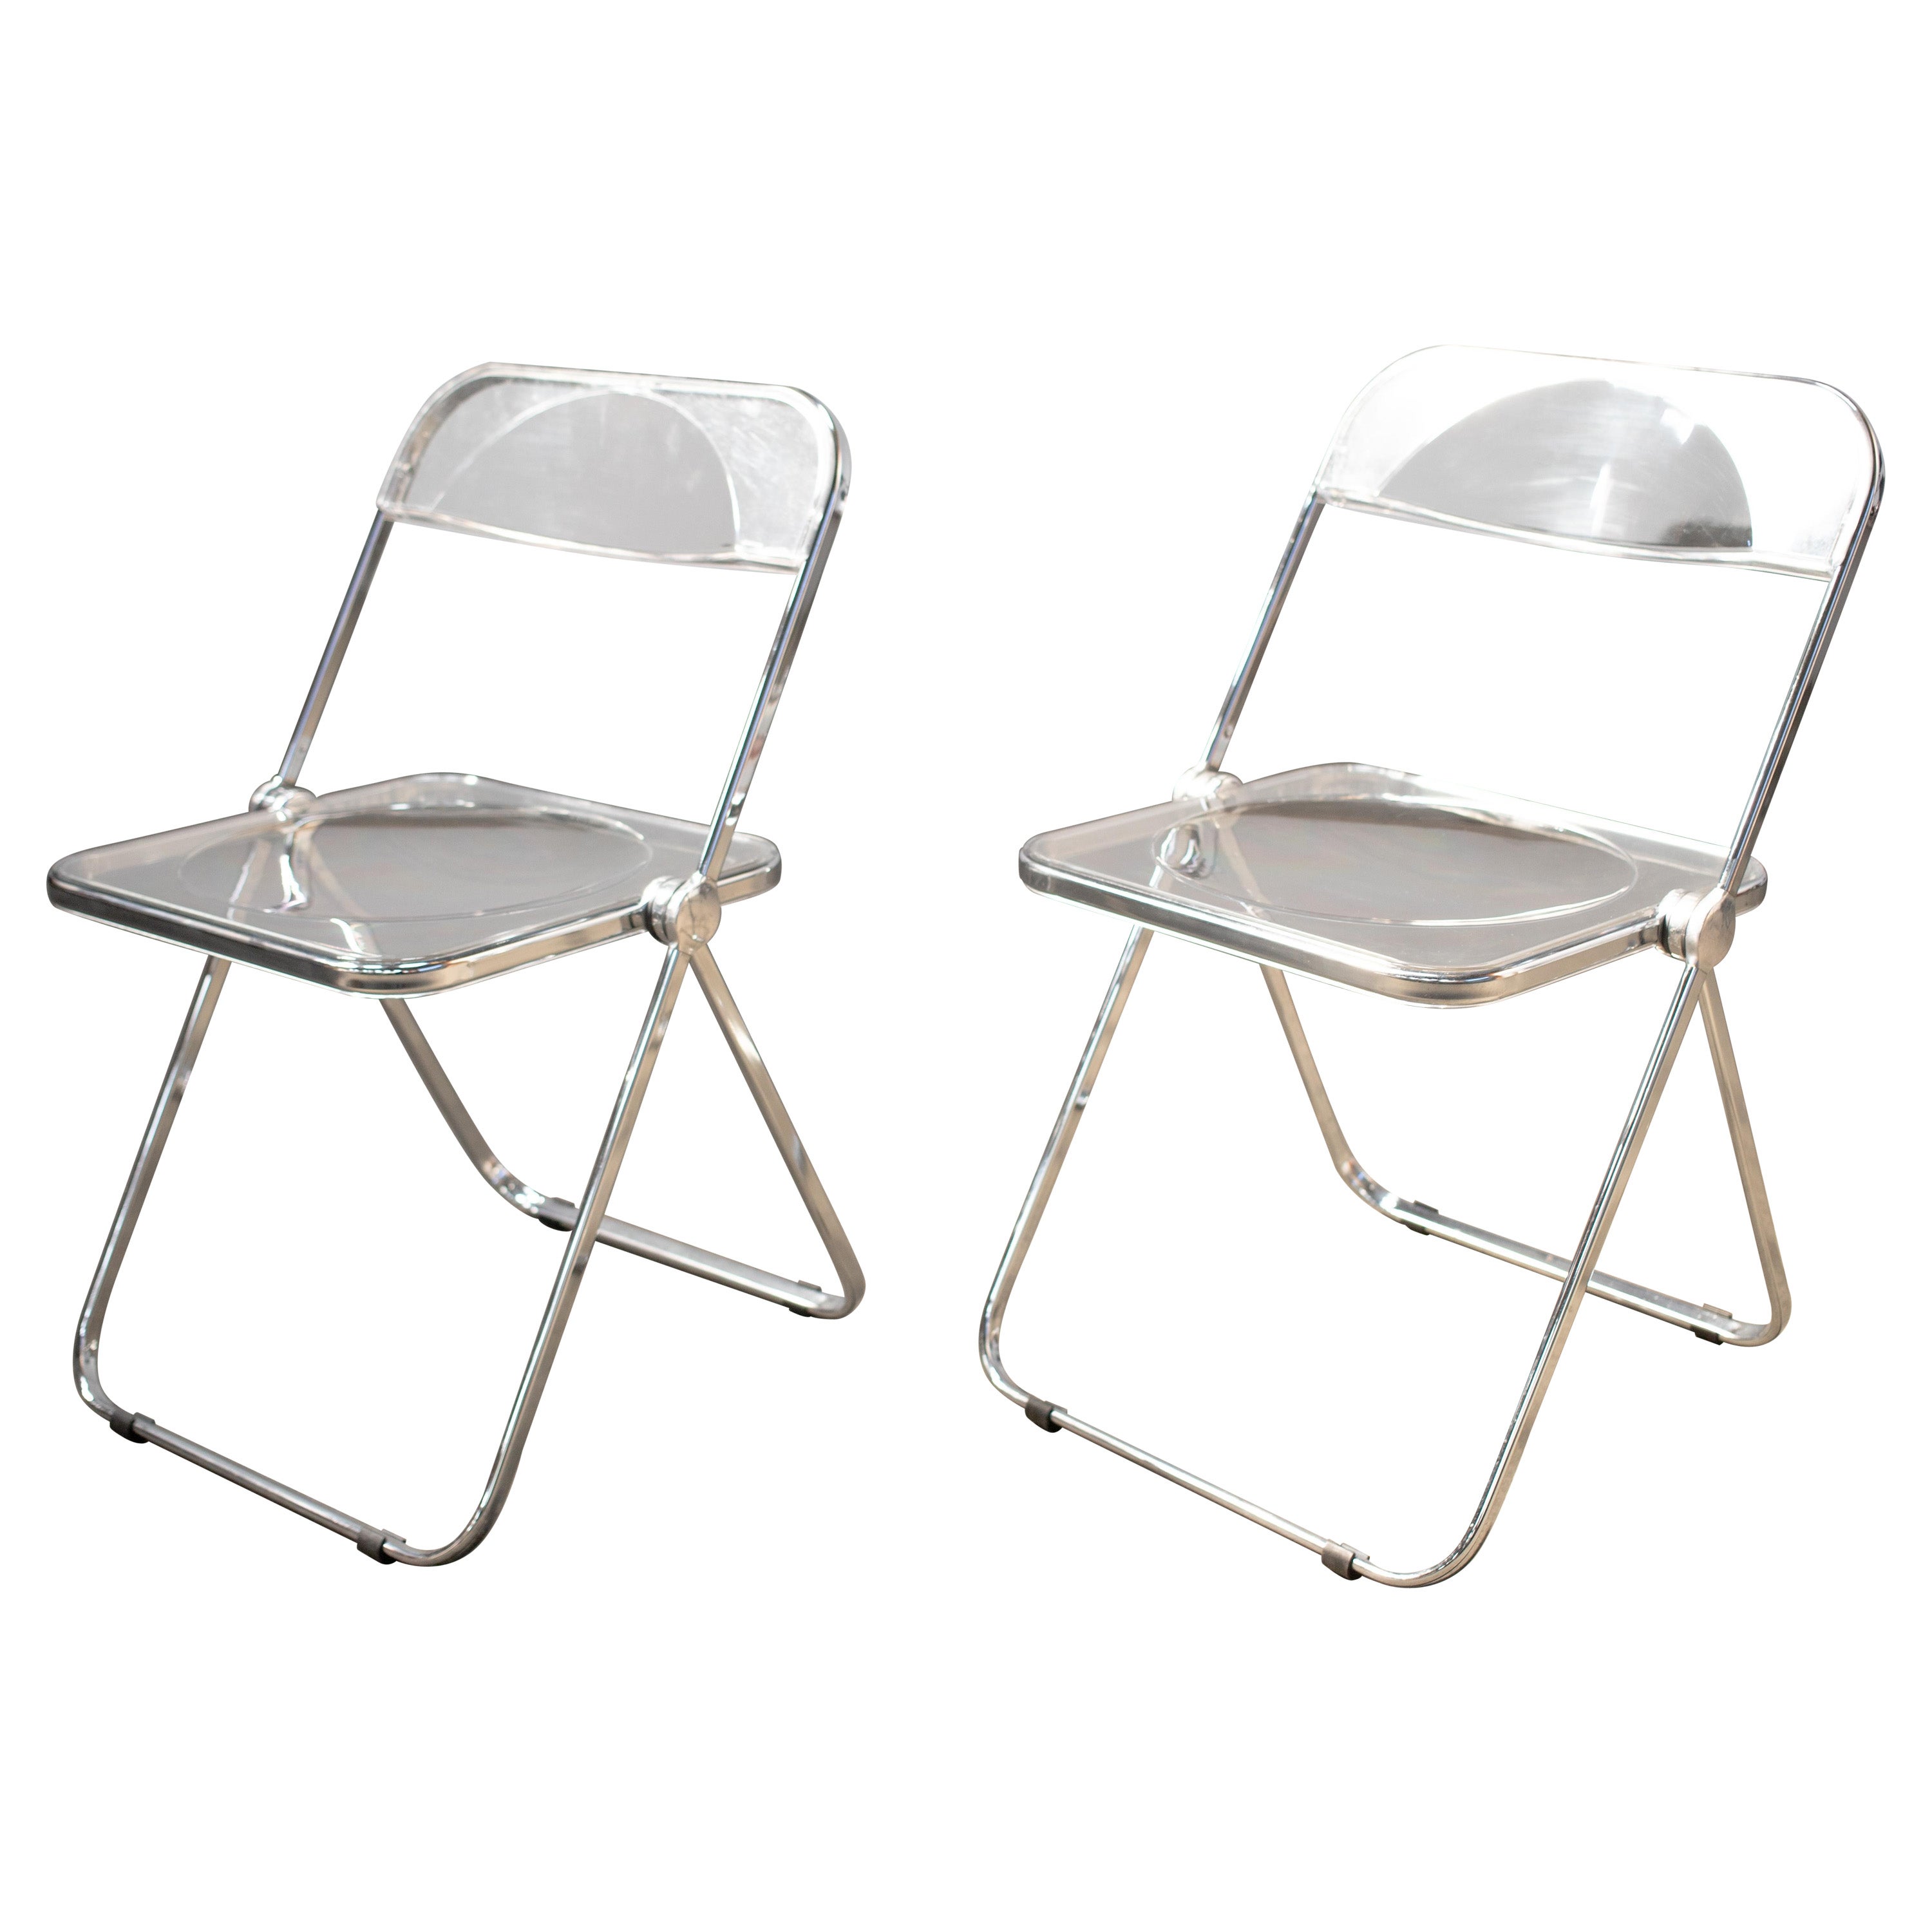 1970s Folding Clear Lucite "Plia" Chair by Piretti for Castelli, Italy, a Pair